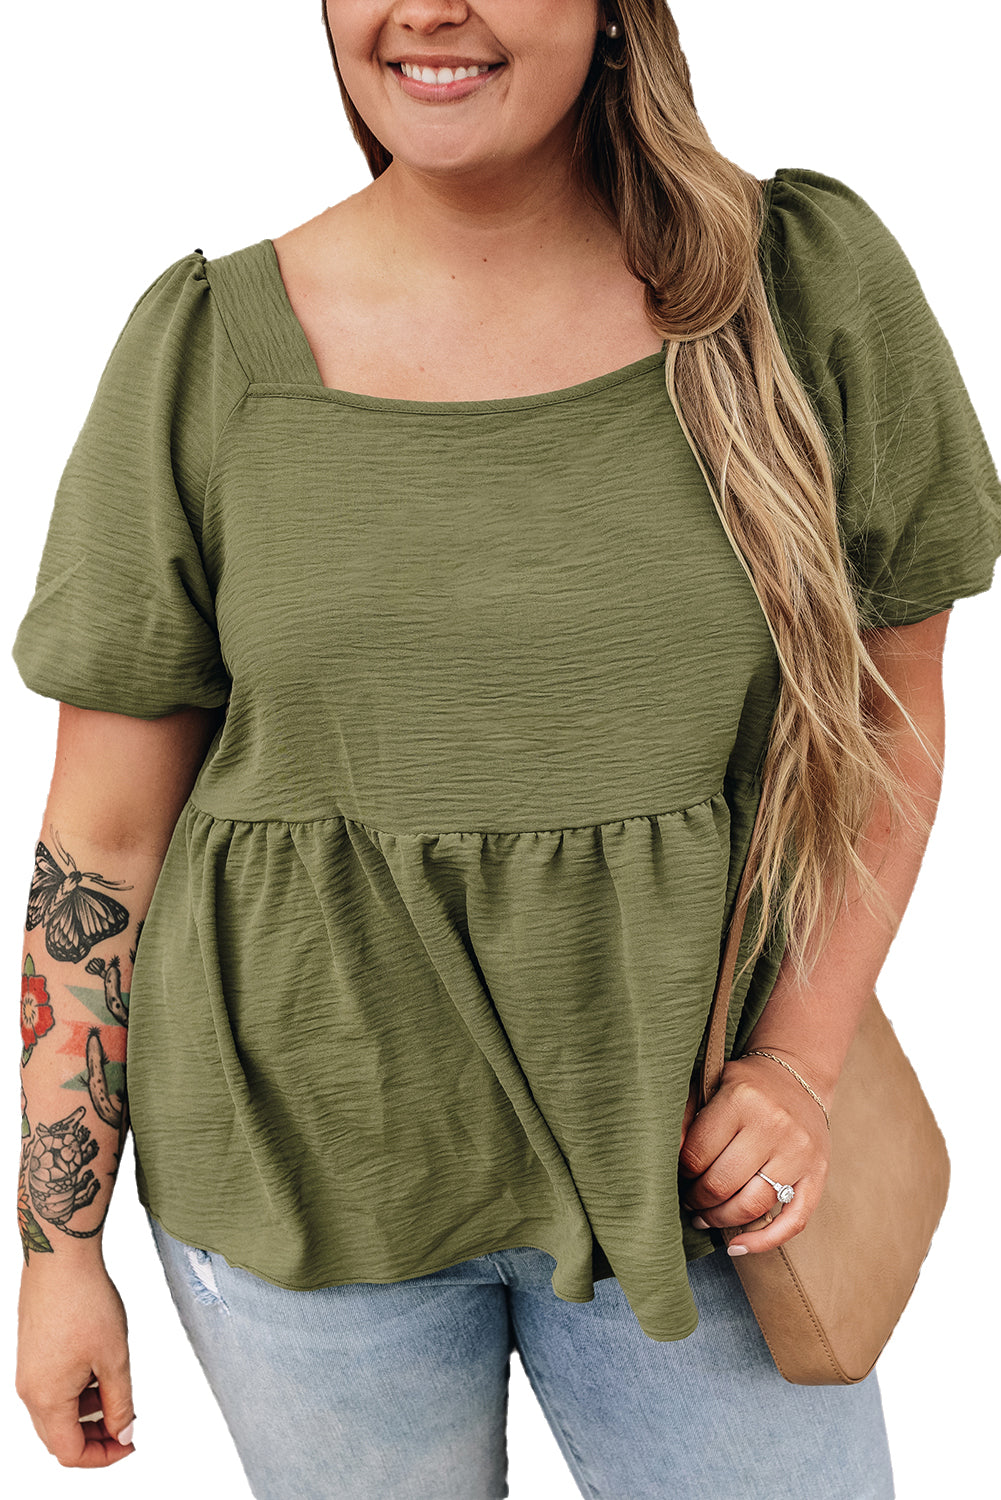 Jungle Green Solid Short Sleeve Square Neck Plus Babydoll Top